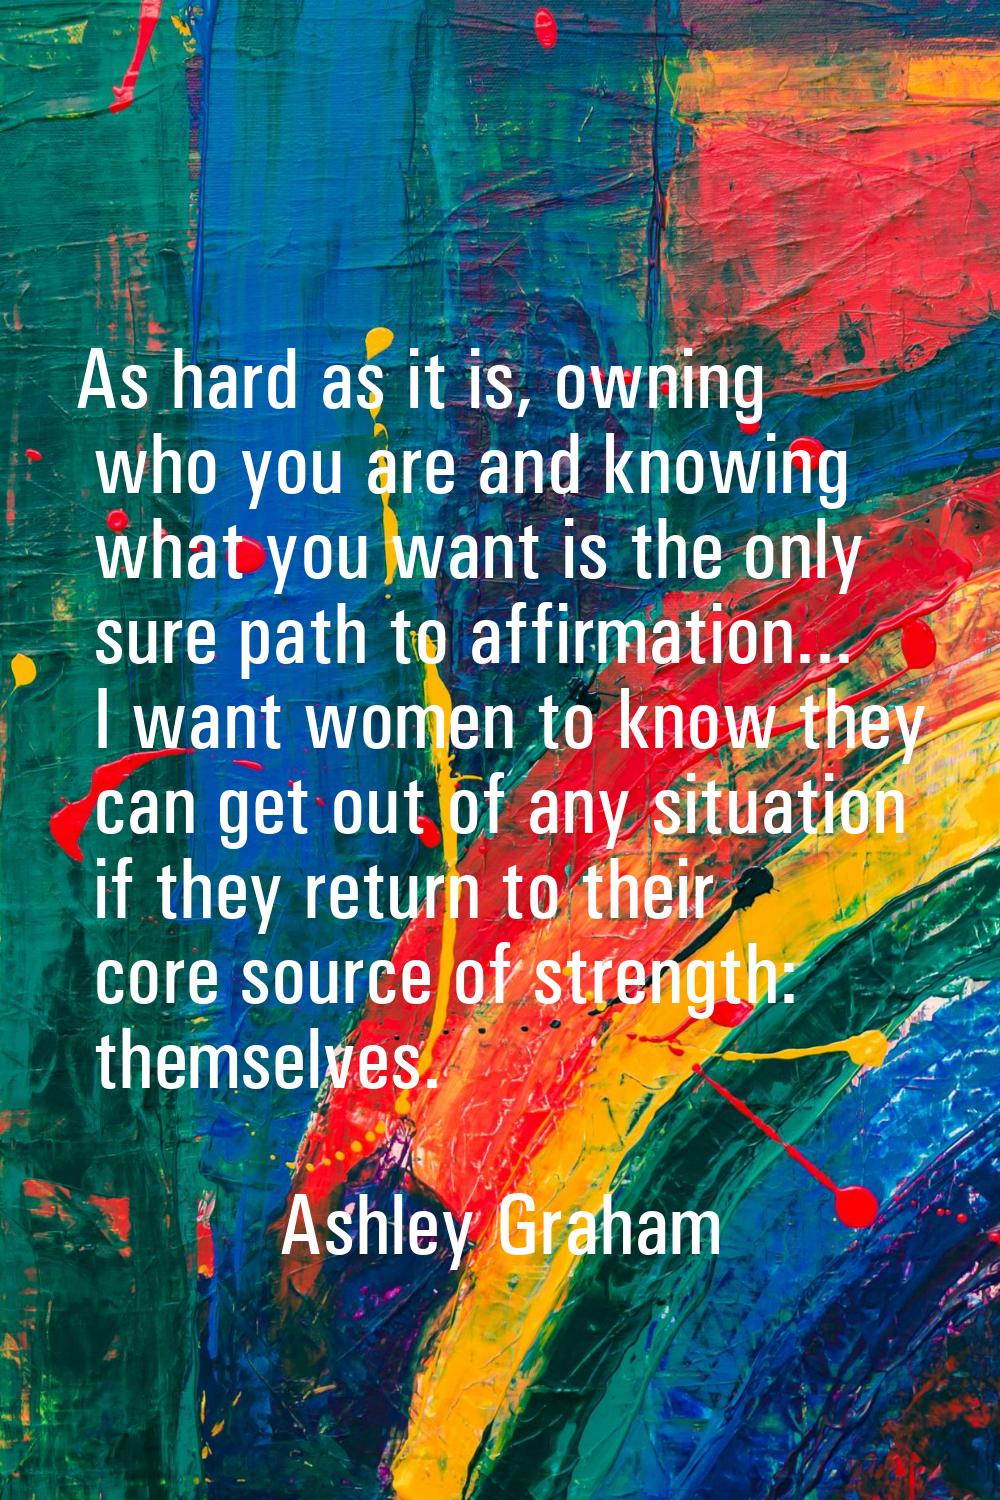 As hard as it is, owning who you are and knowing what you want is the only sure path to affirmation